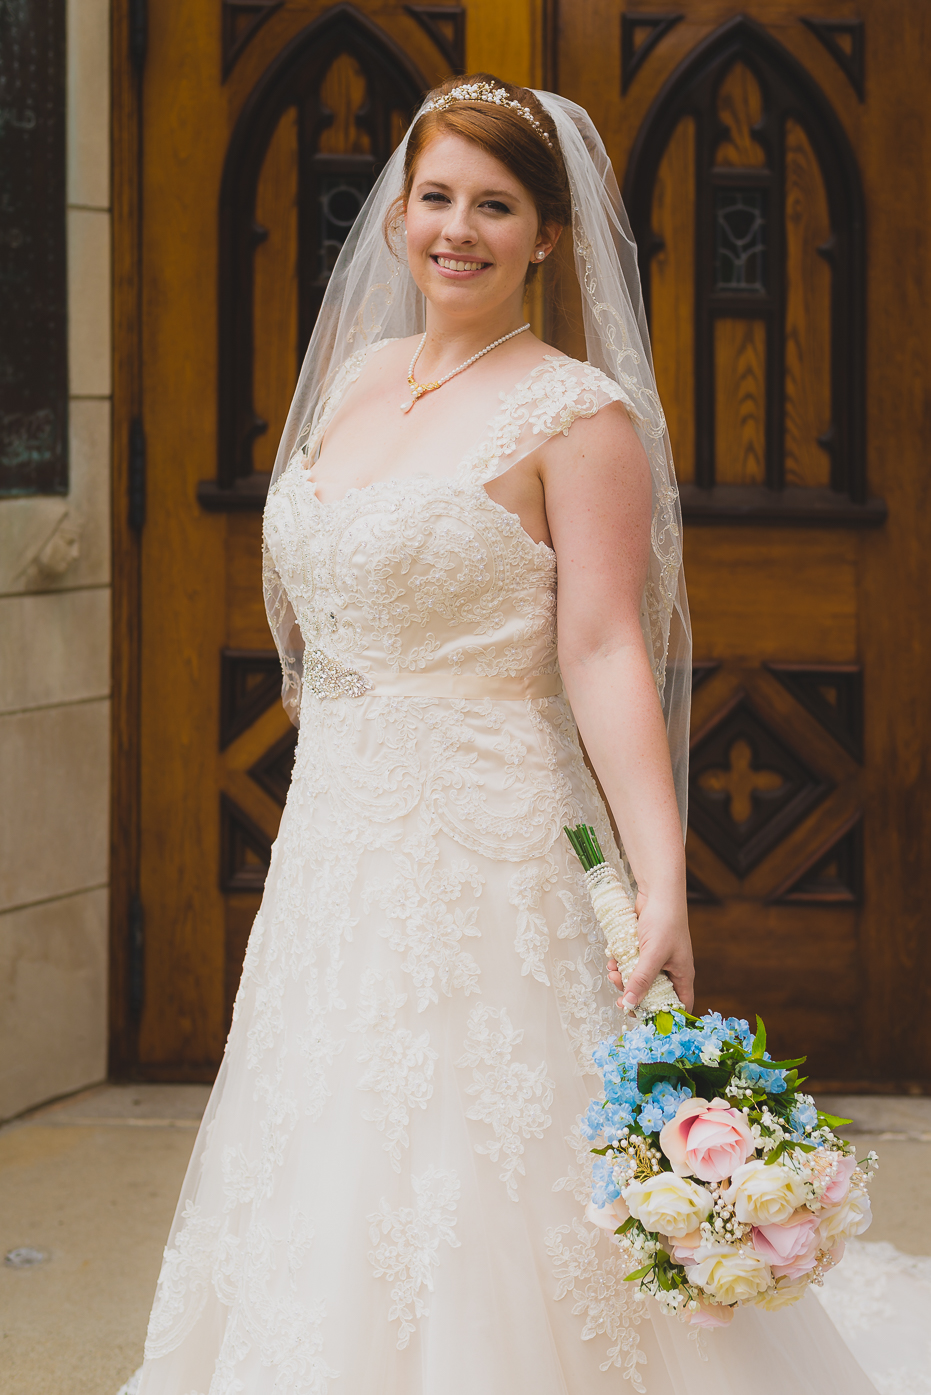 Bride with Vail